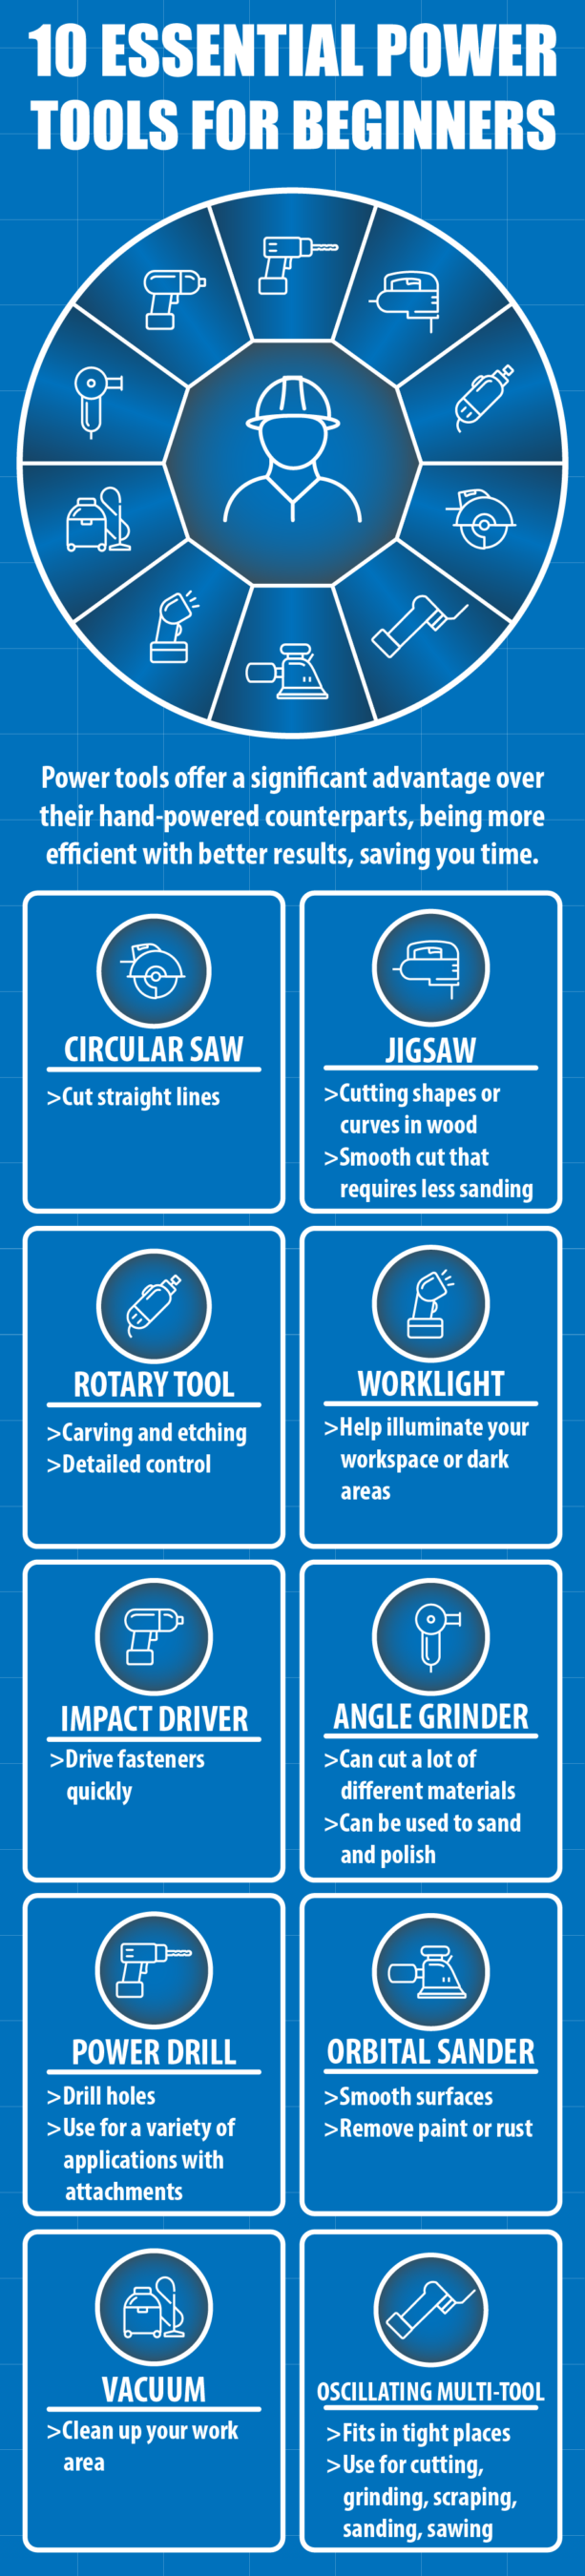 10 essential power tools for beginnersinfographic